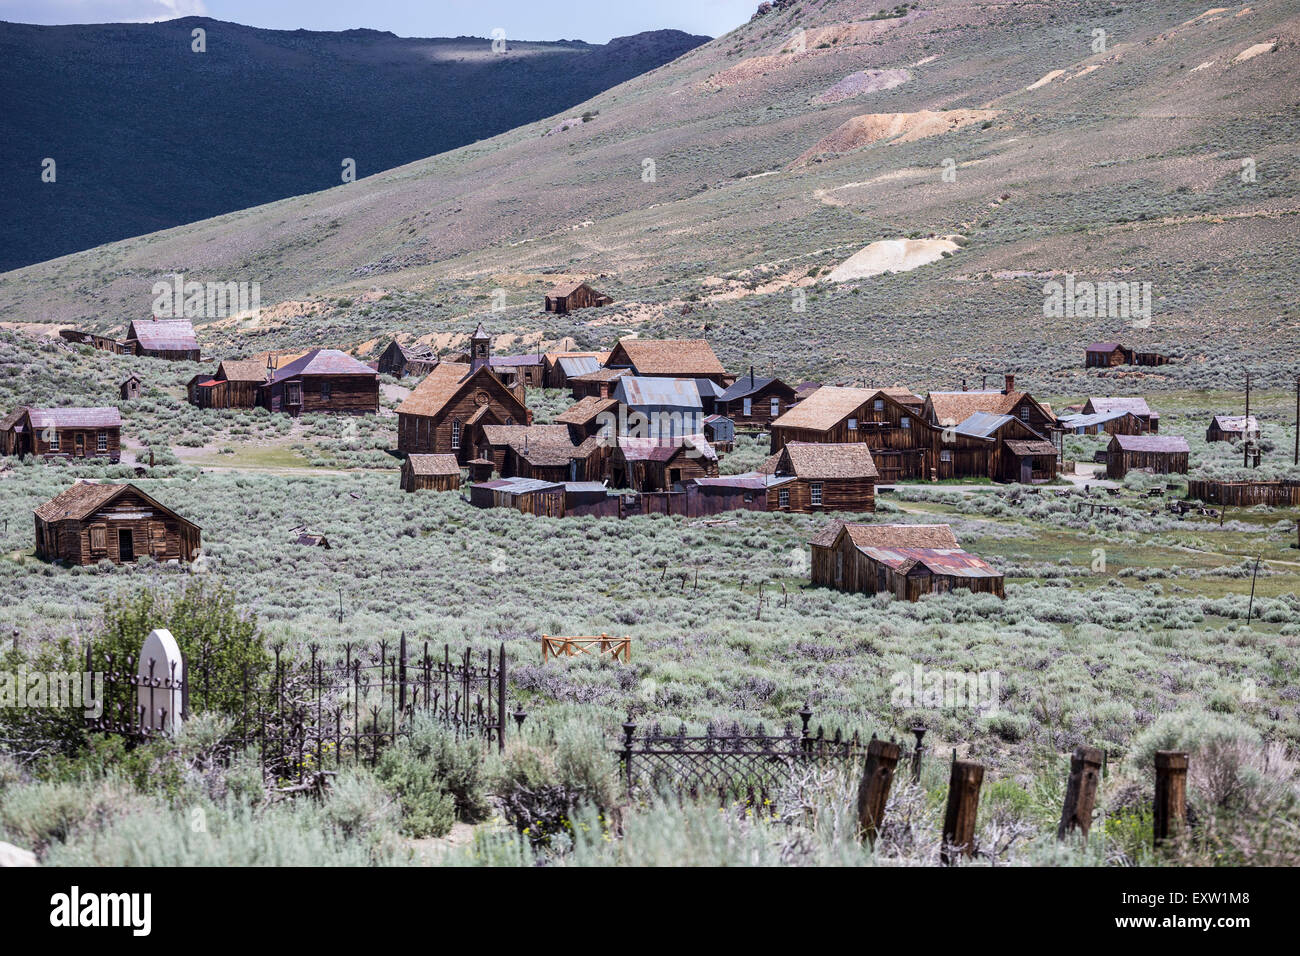 View of Bodie wild west ghost town at Bodie Historic State Park in California. Stock Photo